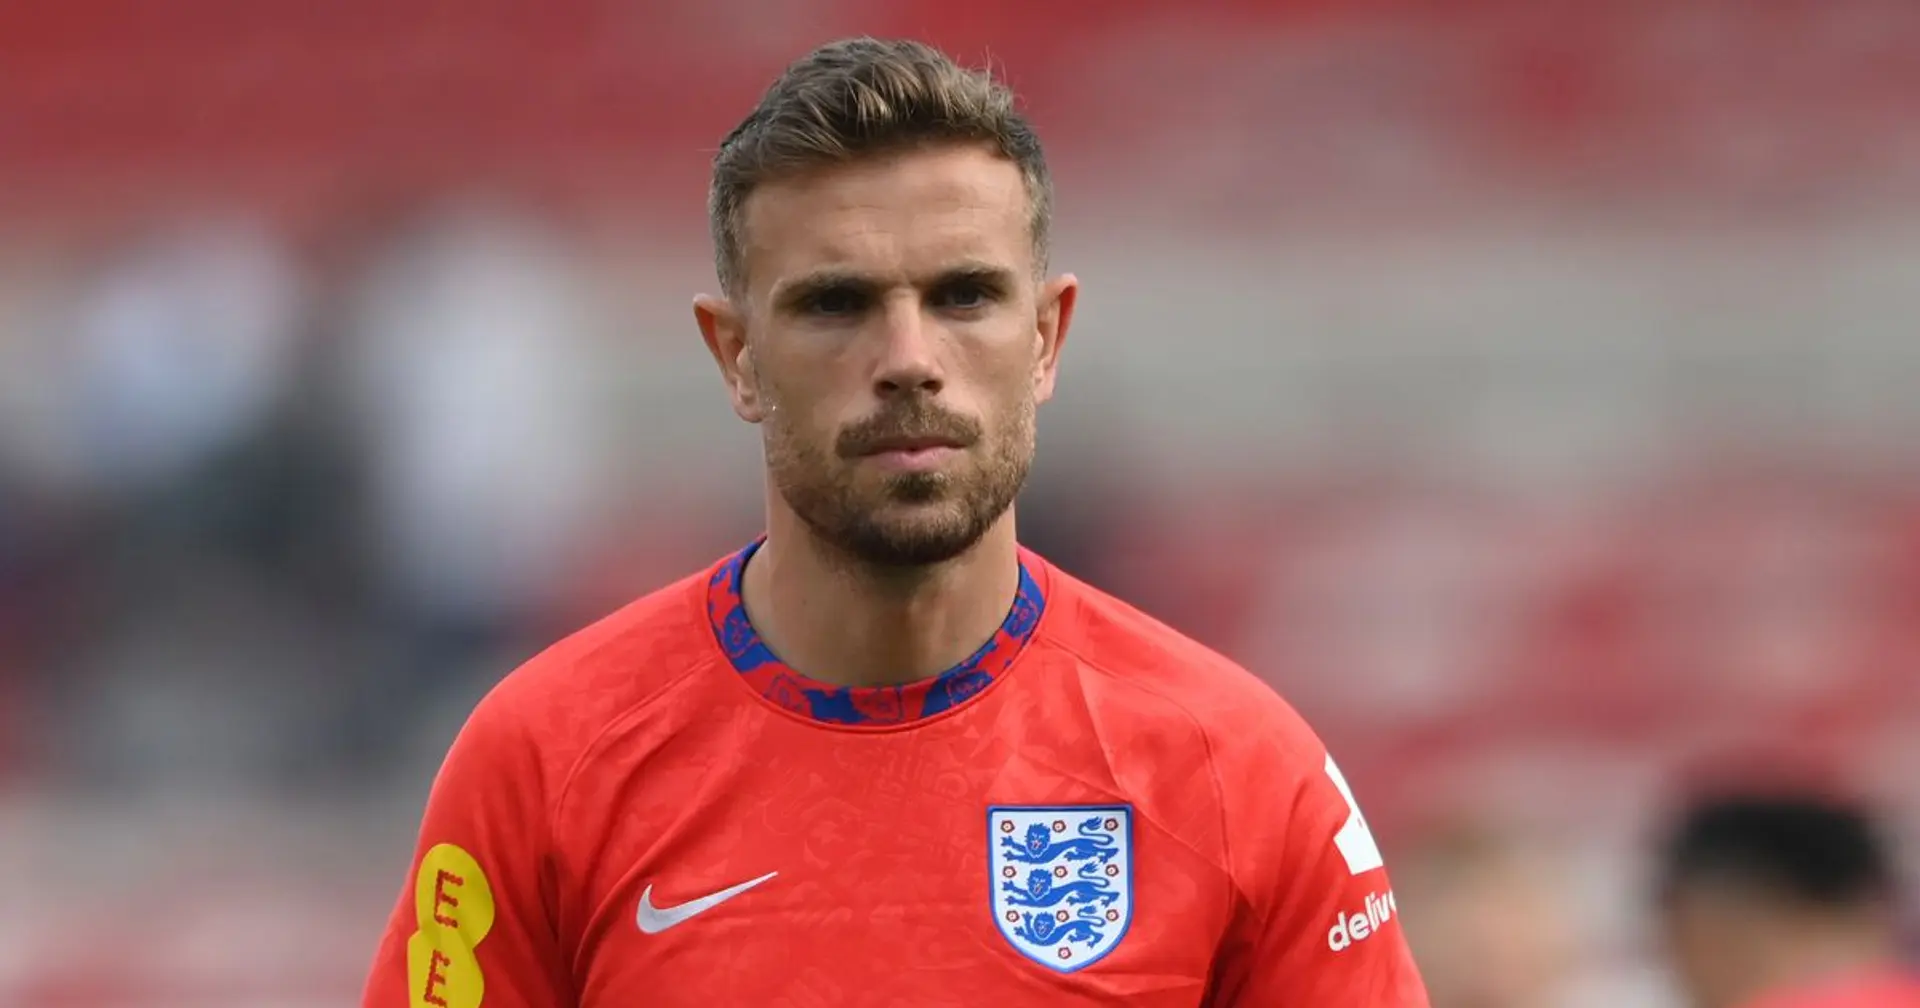 'Getting stronger all the time': Jordan Henderson speaks after first game since February